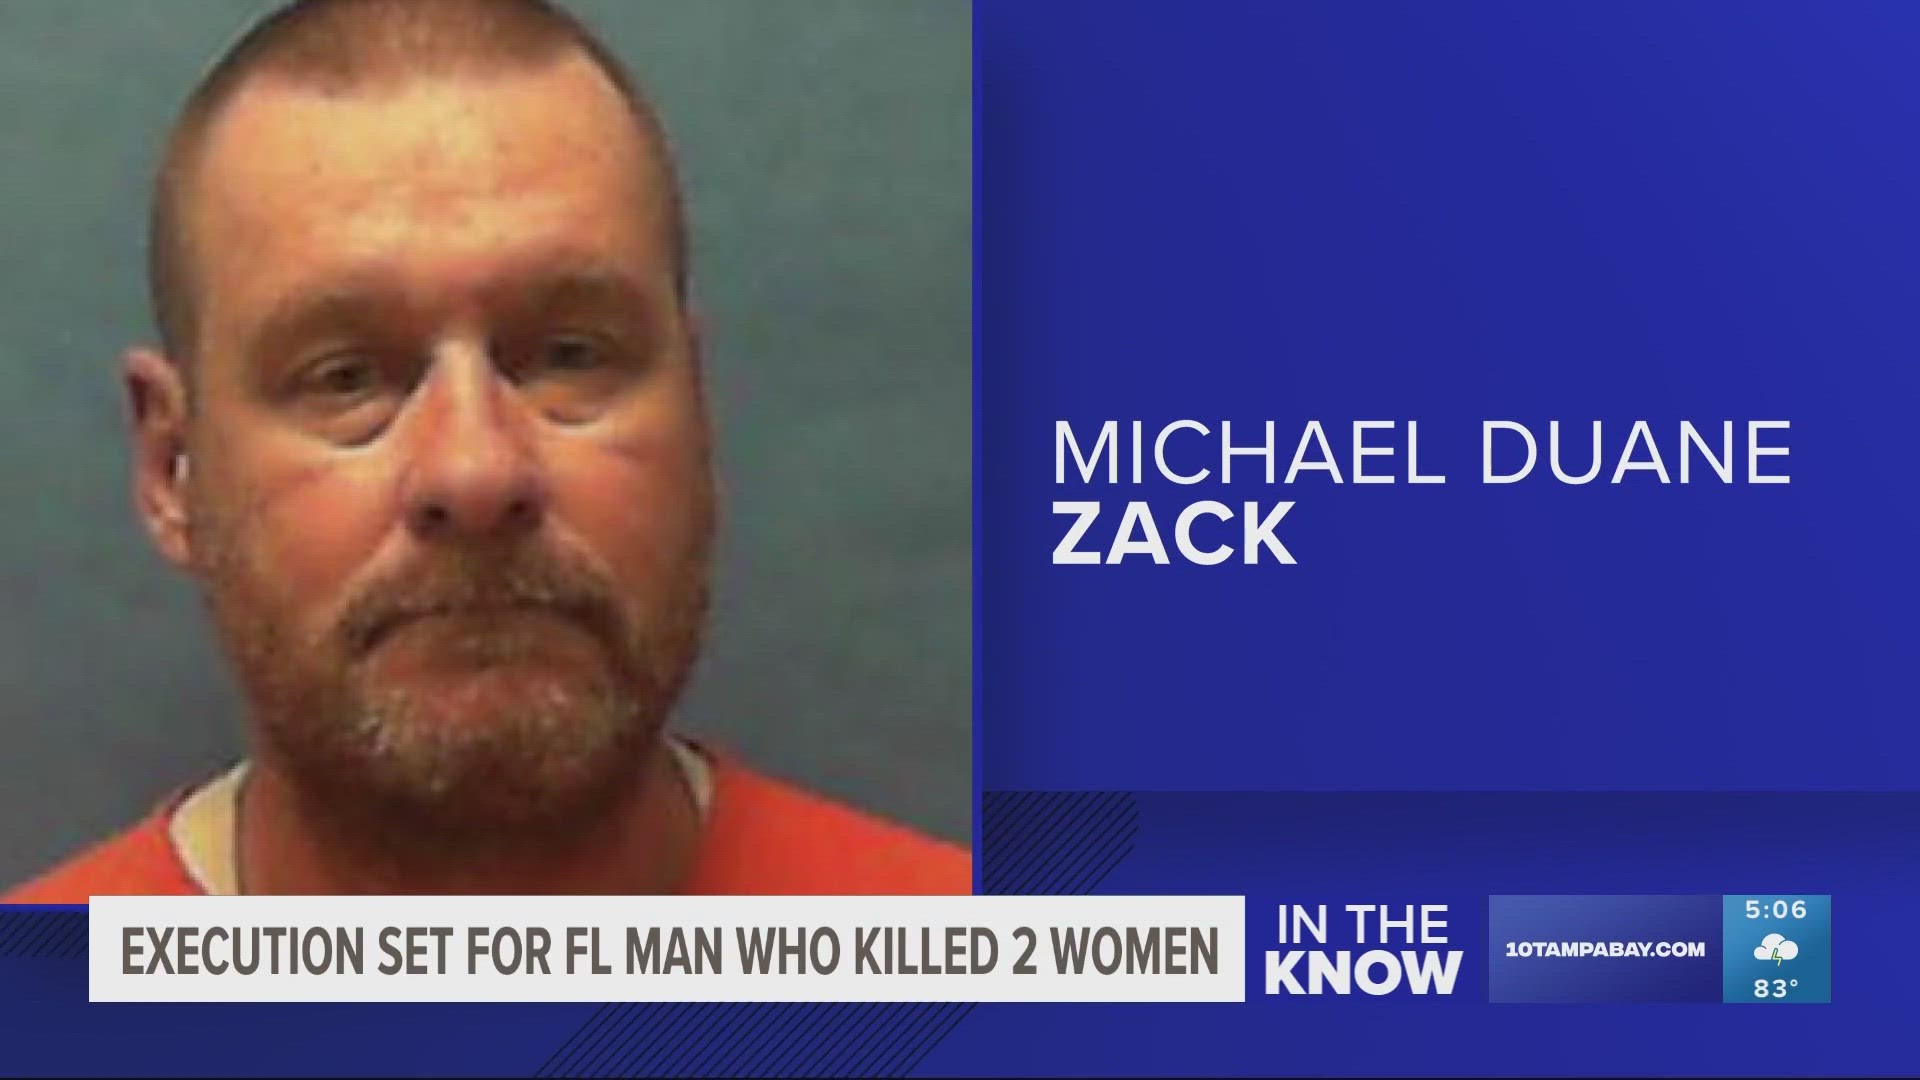 Florida Man Convicted Of Killing 2 Women Set To Be Executed